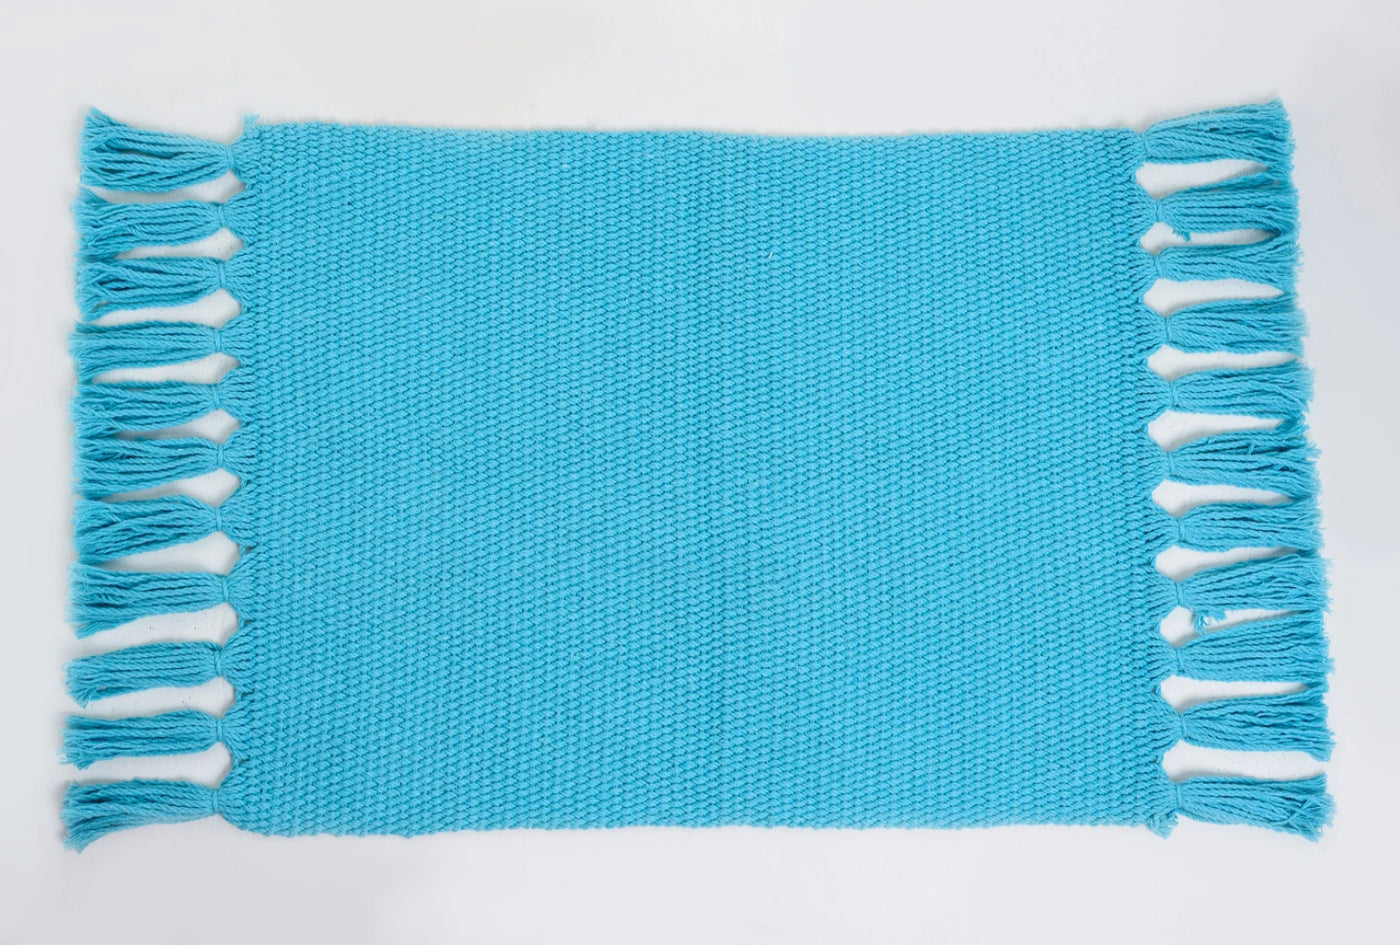 Sky Blue Handmade Cotton Placemats Set of 6 Formal Casual Decor